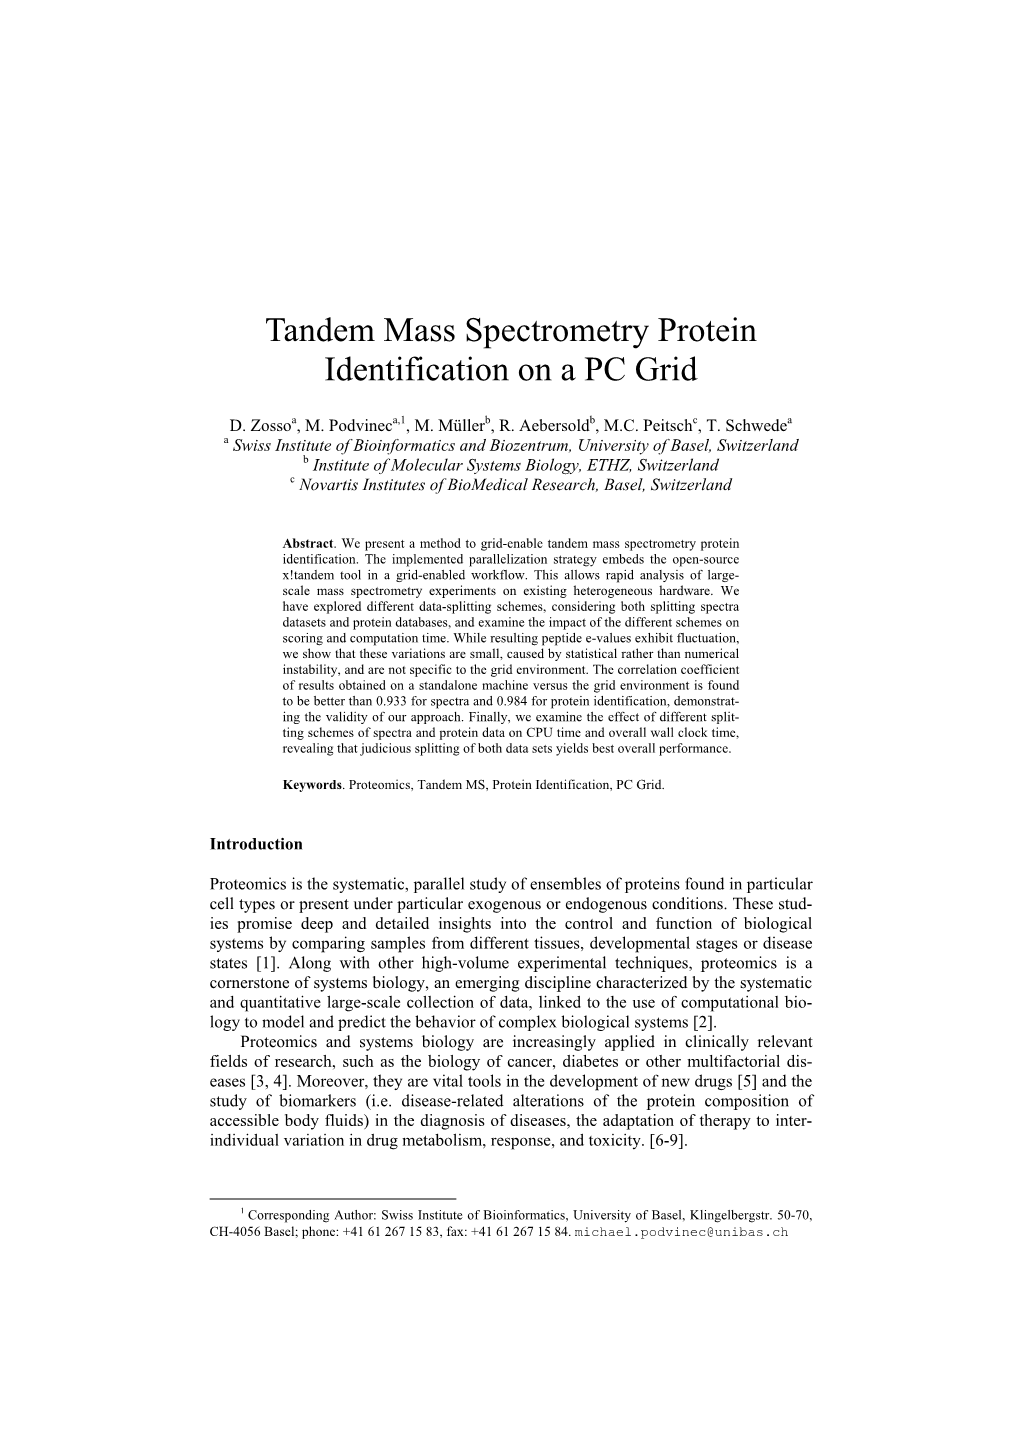 Tandem Mass Spectrometry Protein Identification on a PC Grid